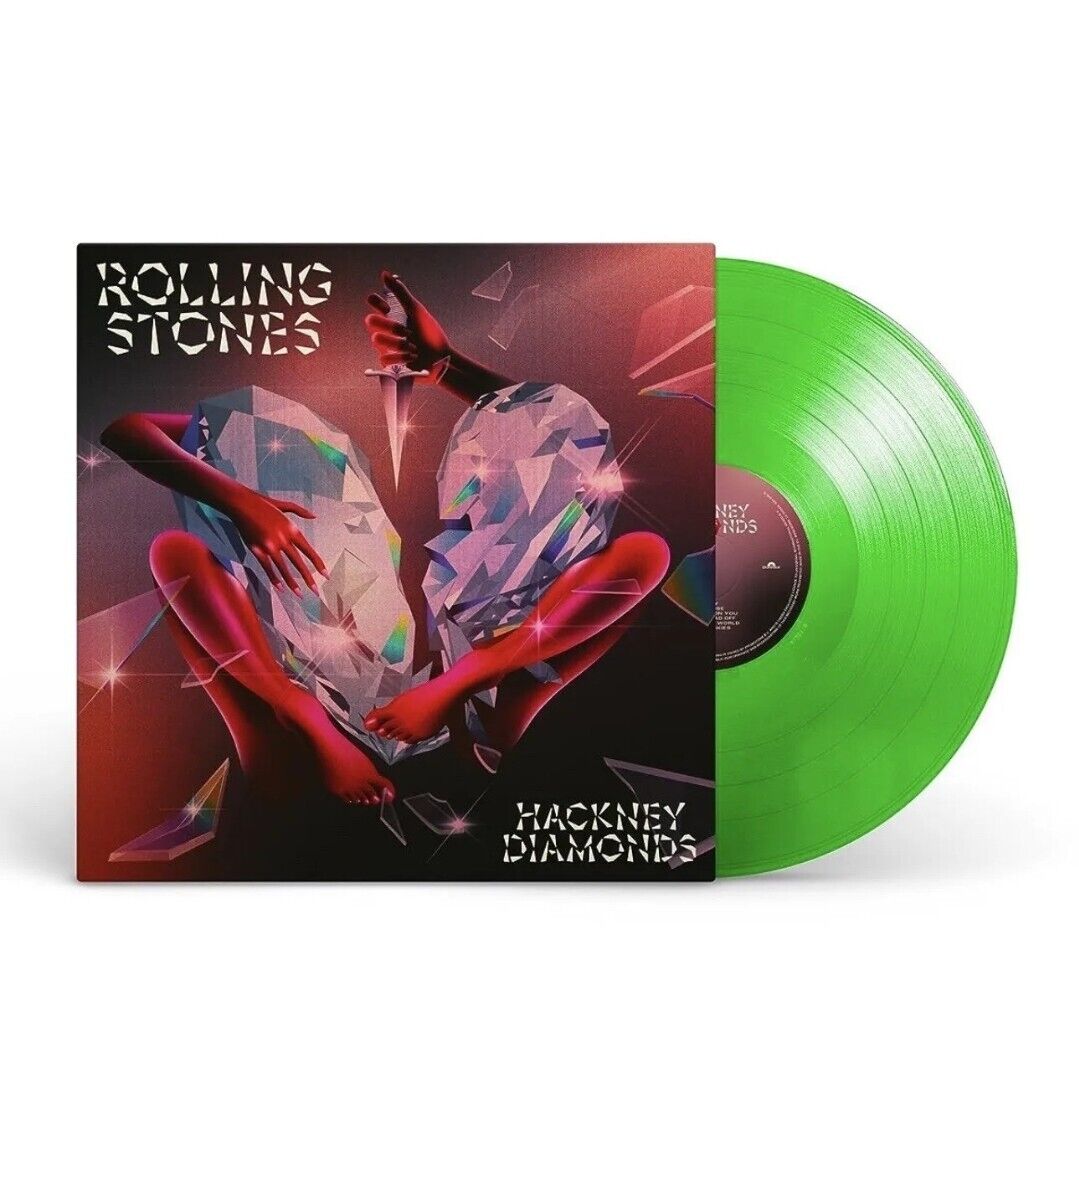 THE ROLLING STONES - Hackney Diamonds - Limited Edition GREEN Vinyl LP In Hand